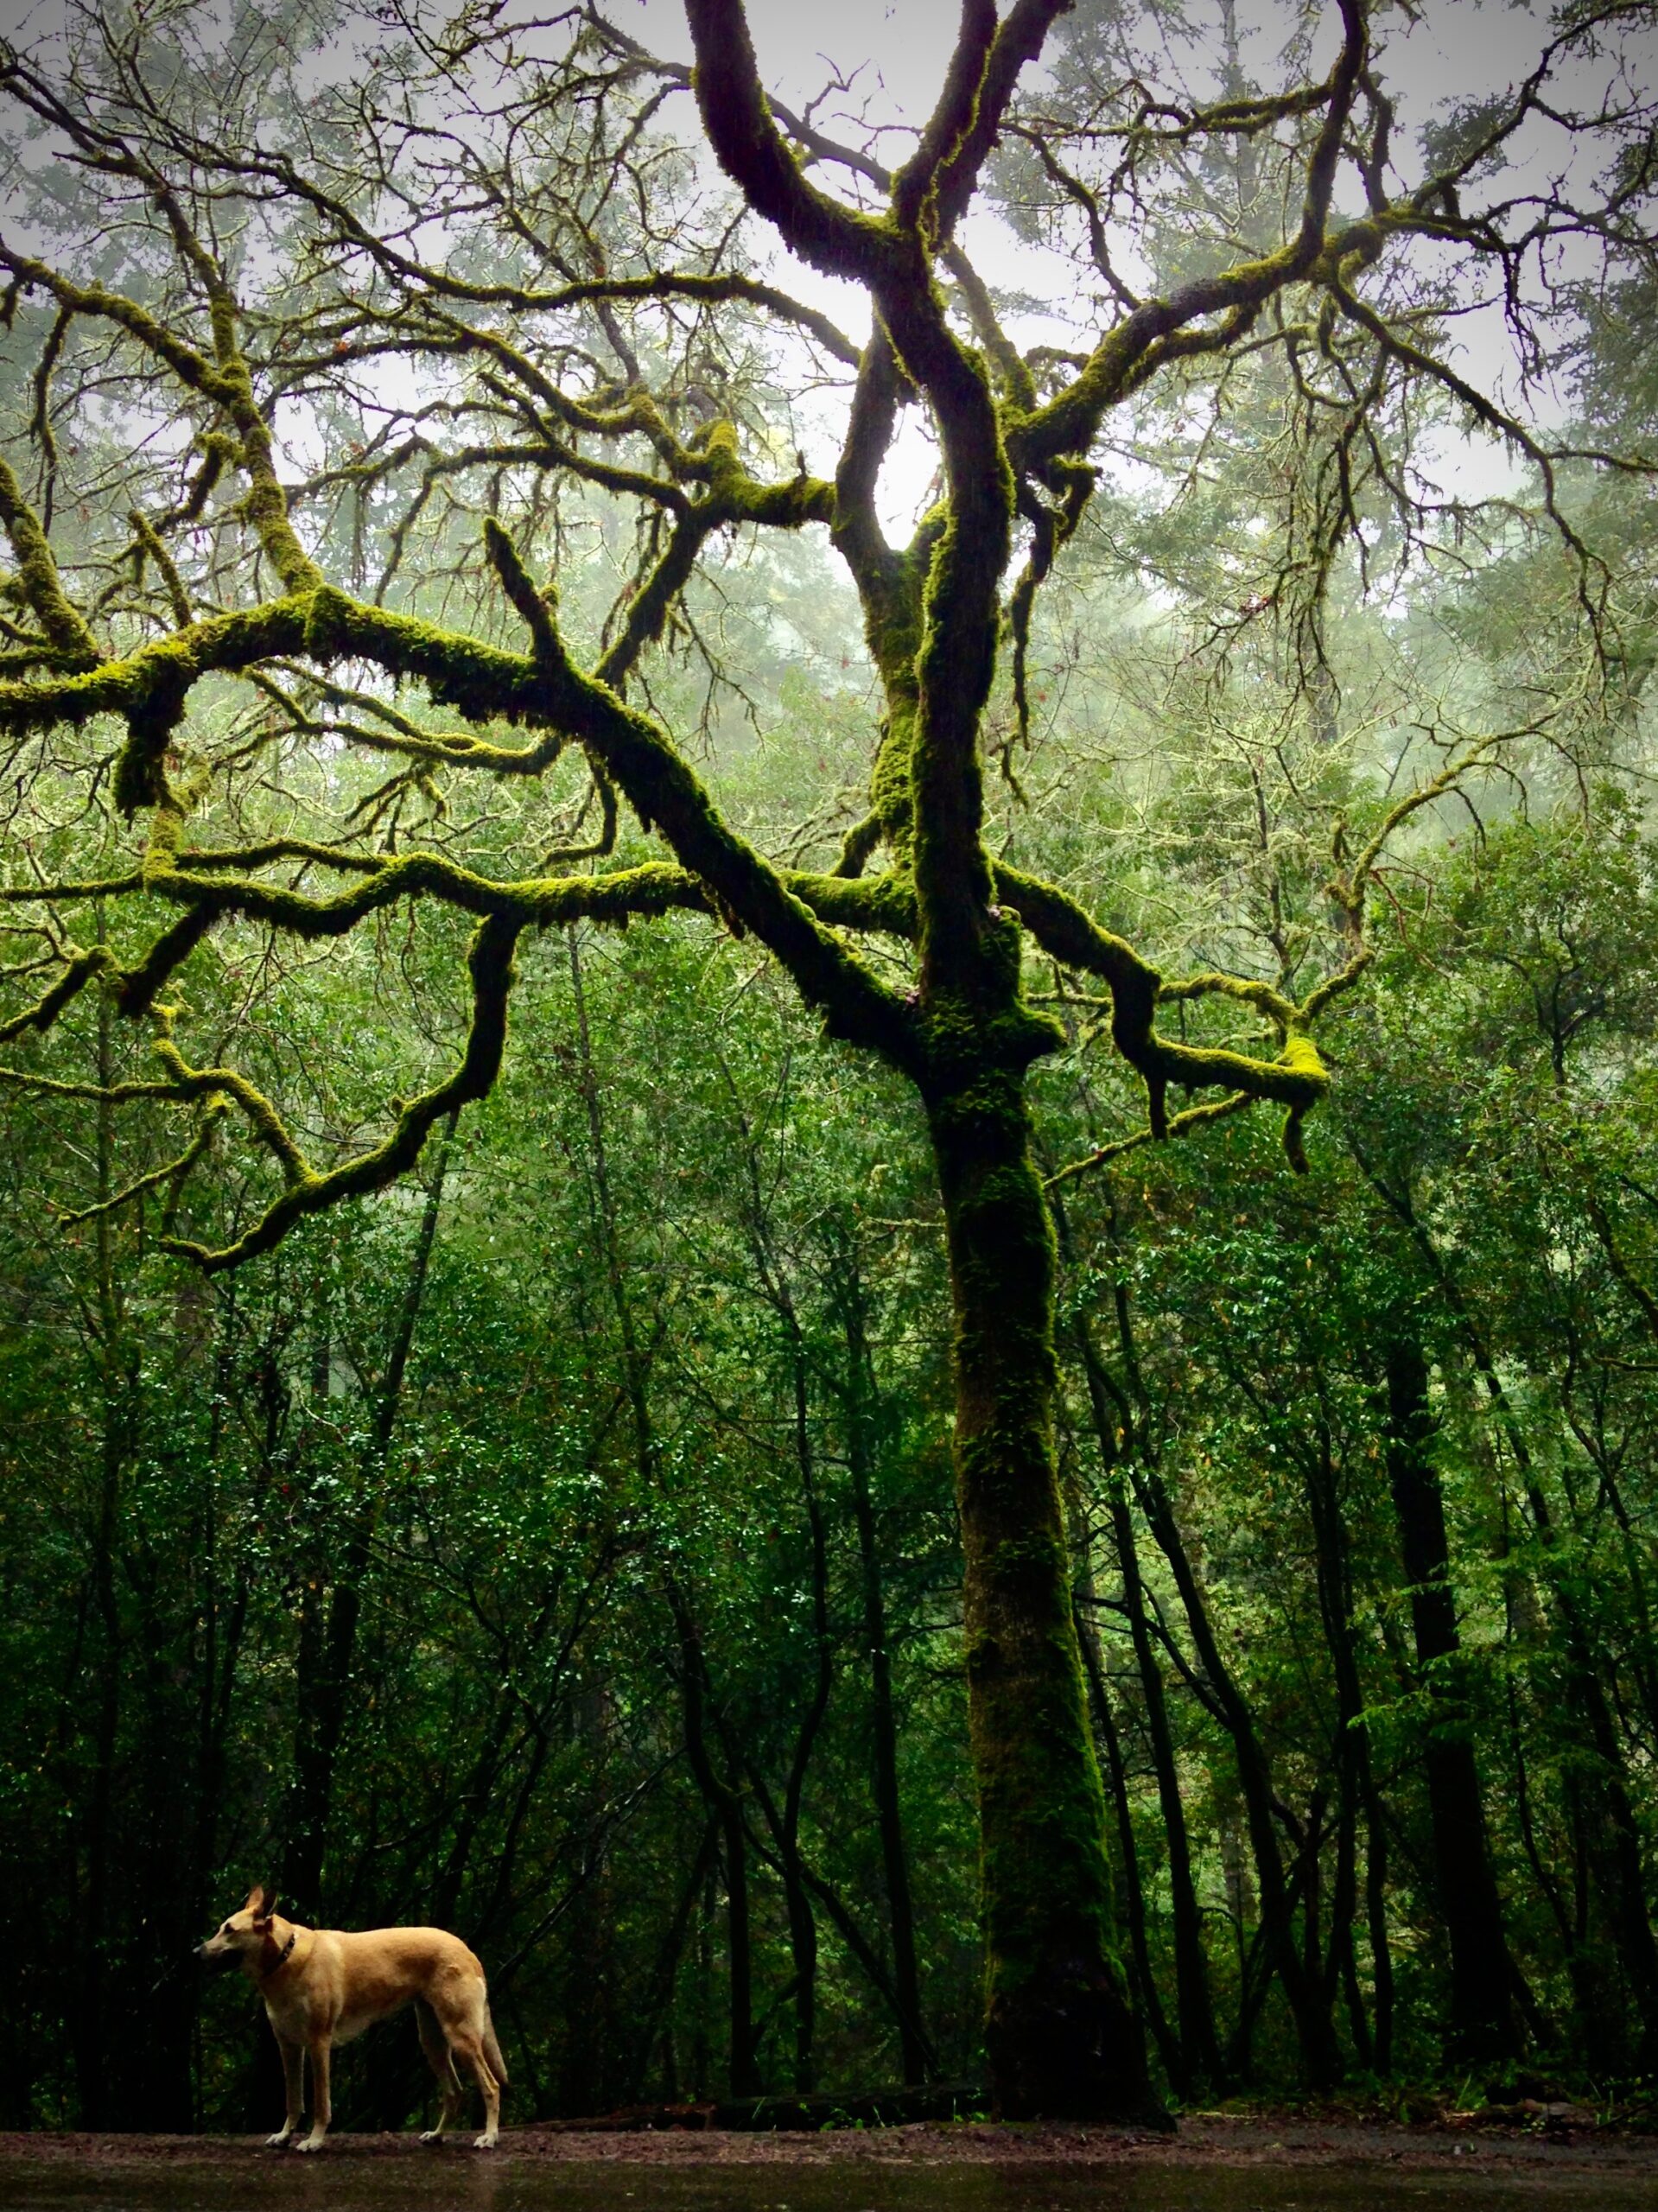 A dog standing under a tree in the forest.